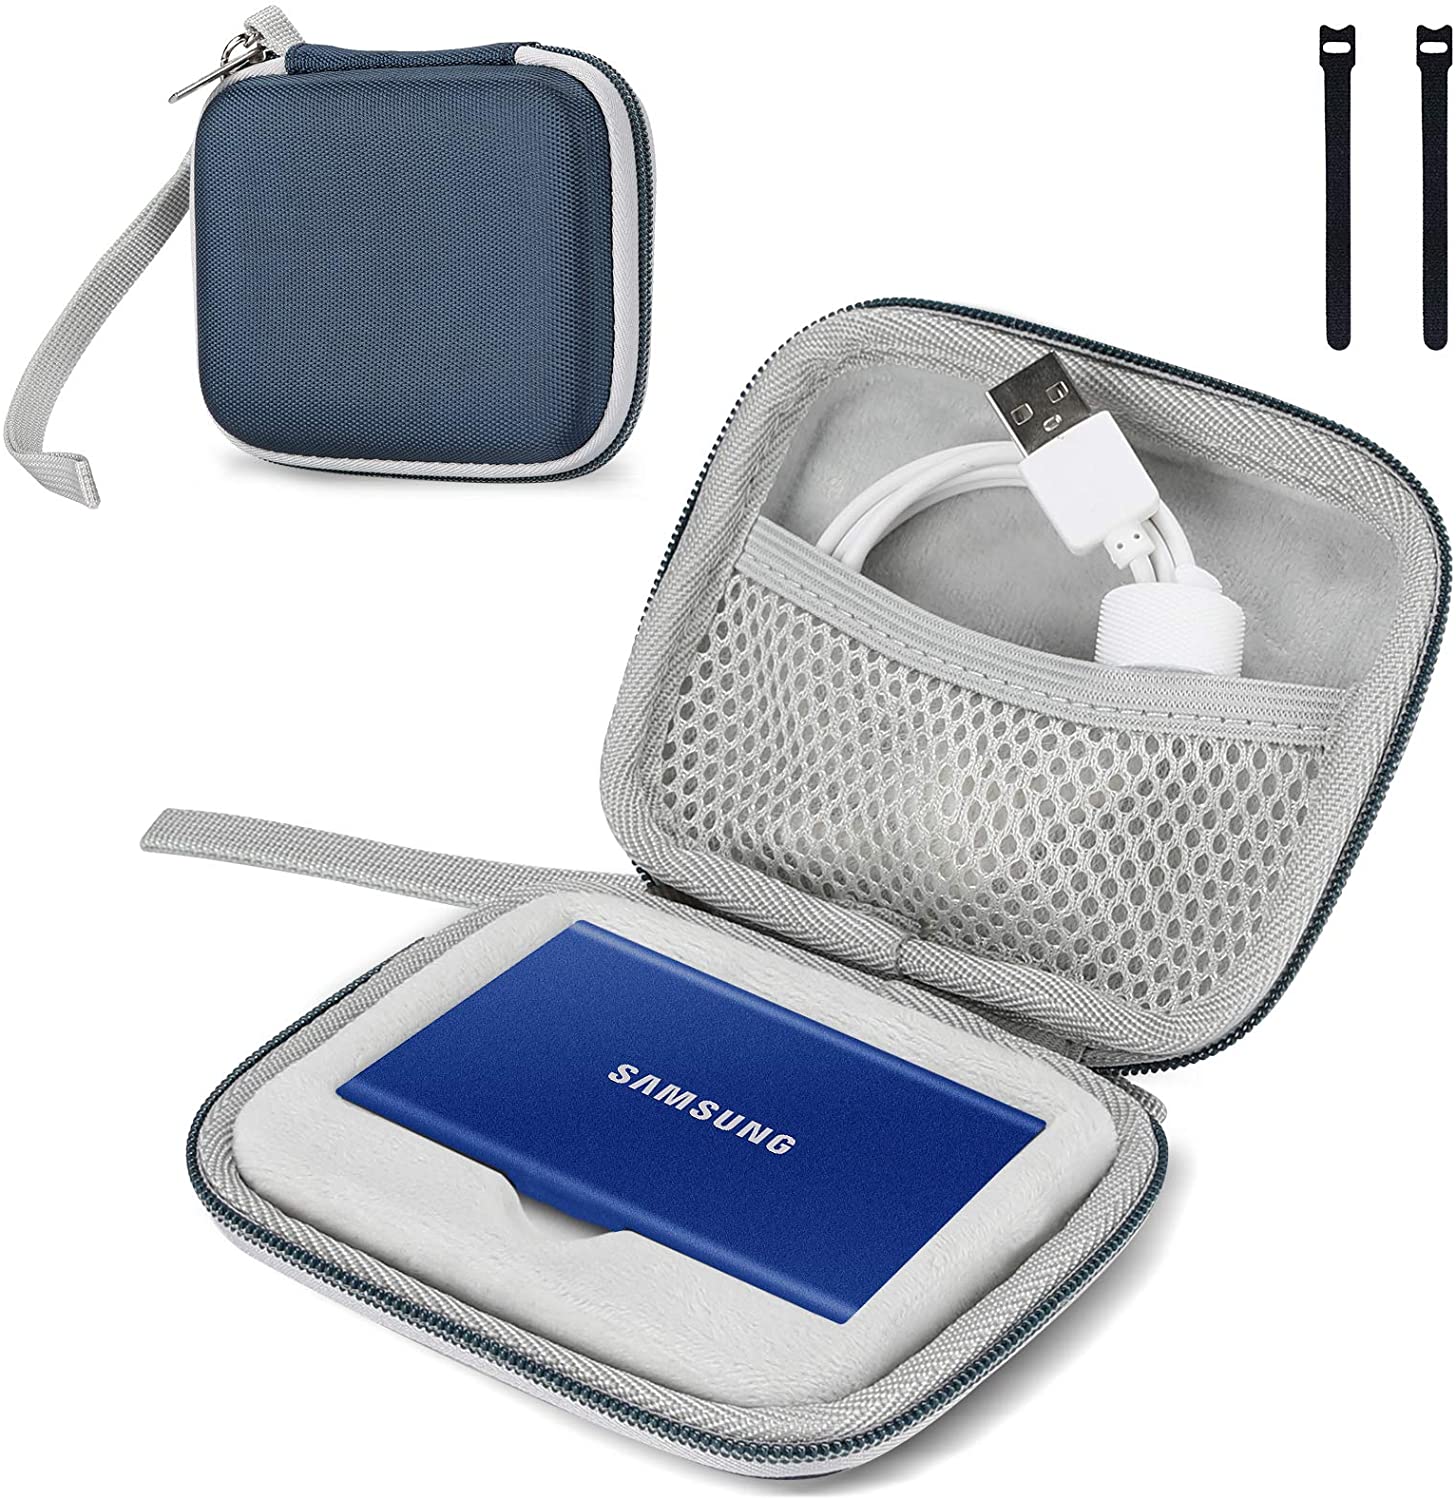 CASE ONLY) Hard Carrying Case for Samsung T7/ T7 Touch Portable